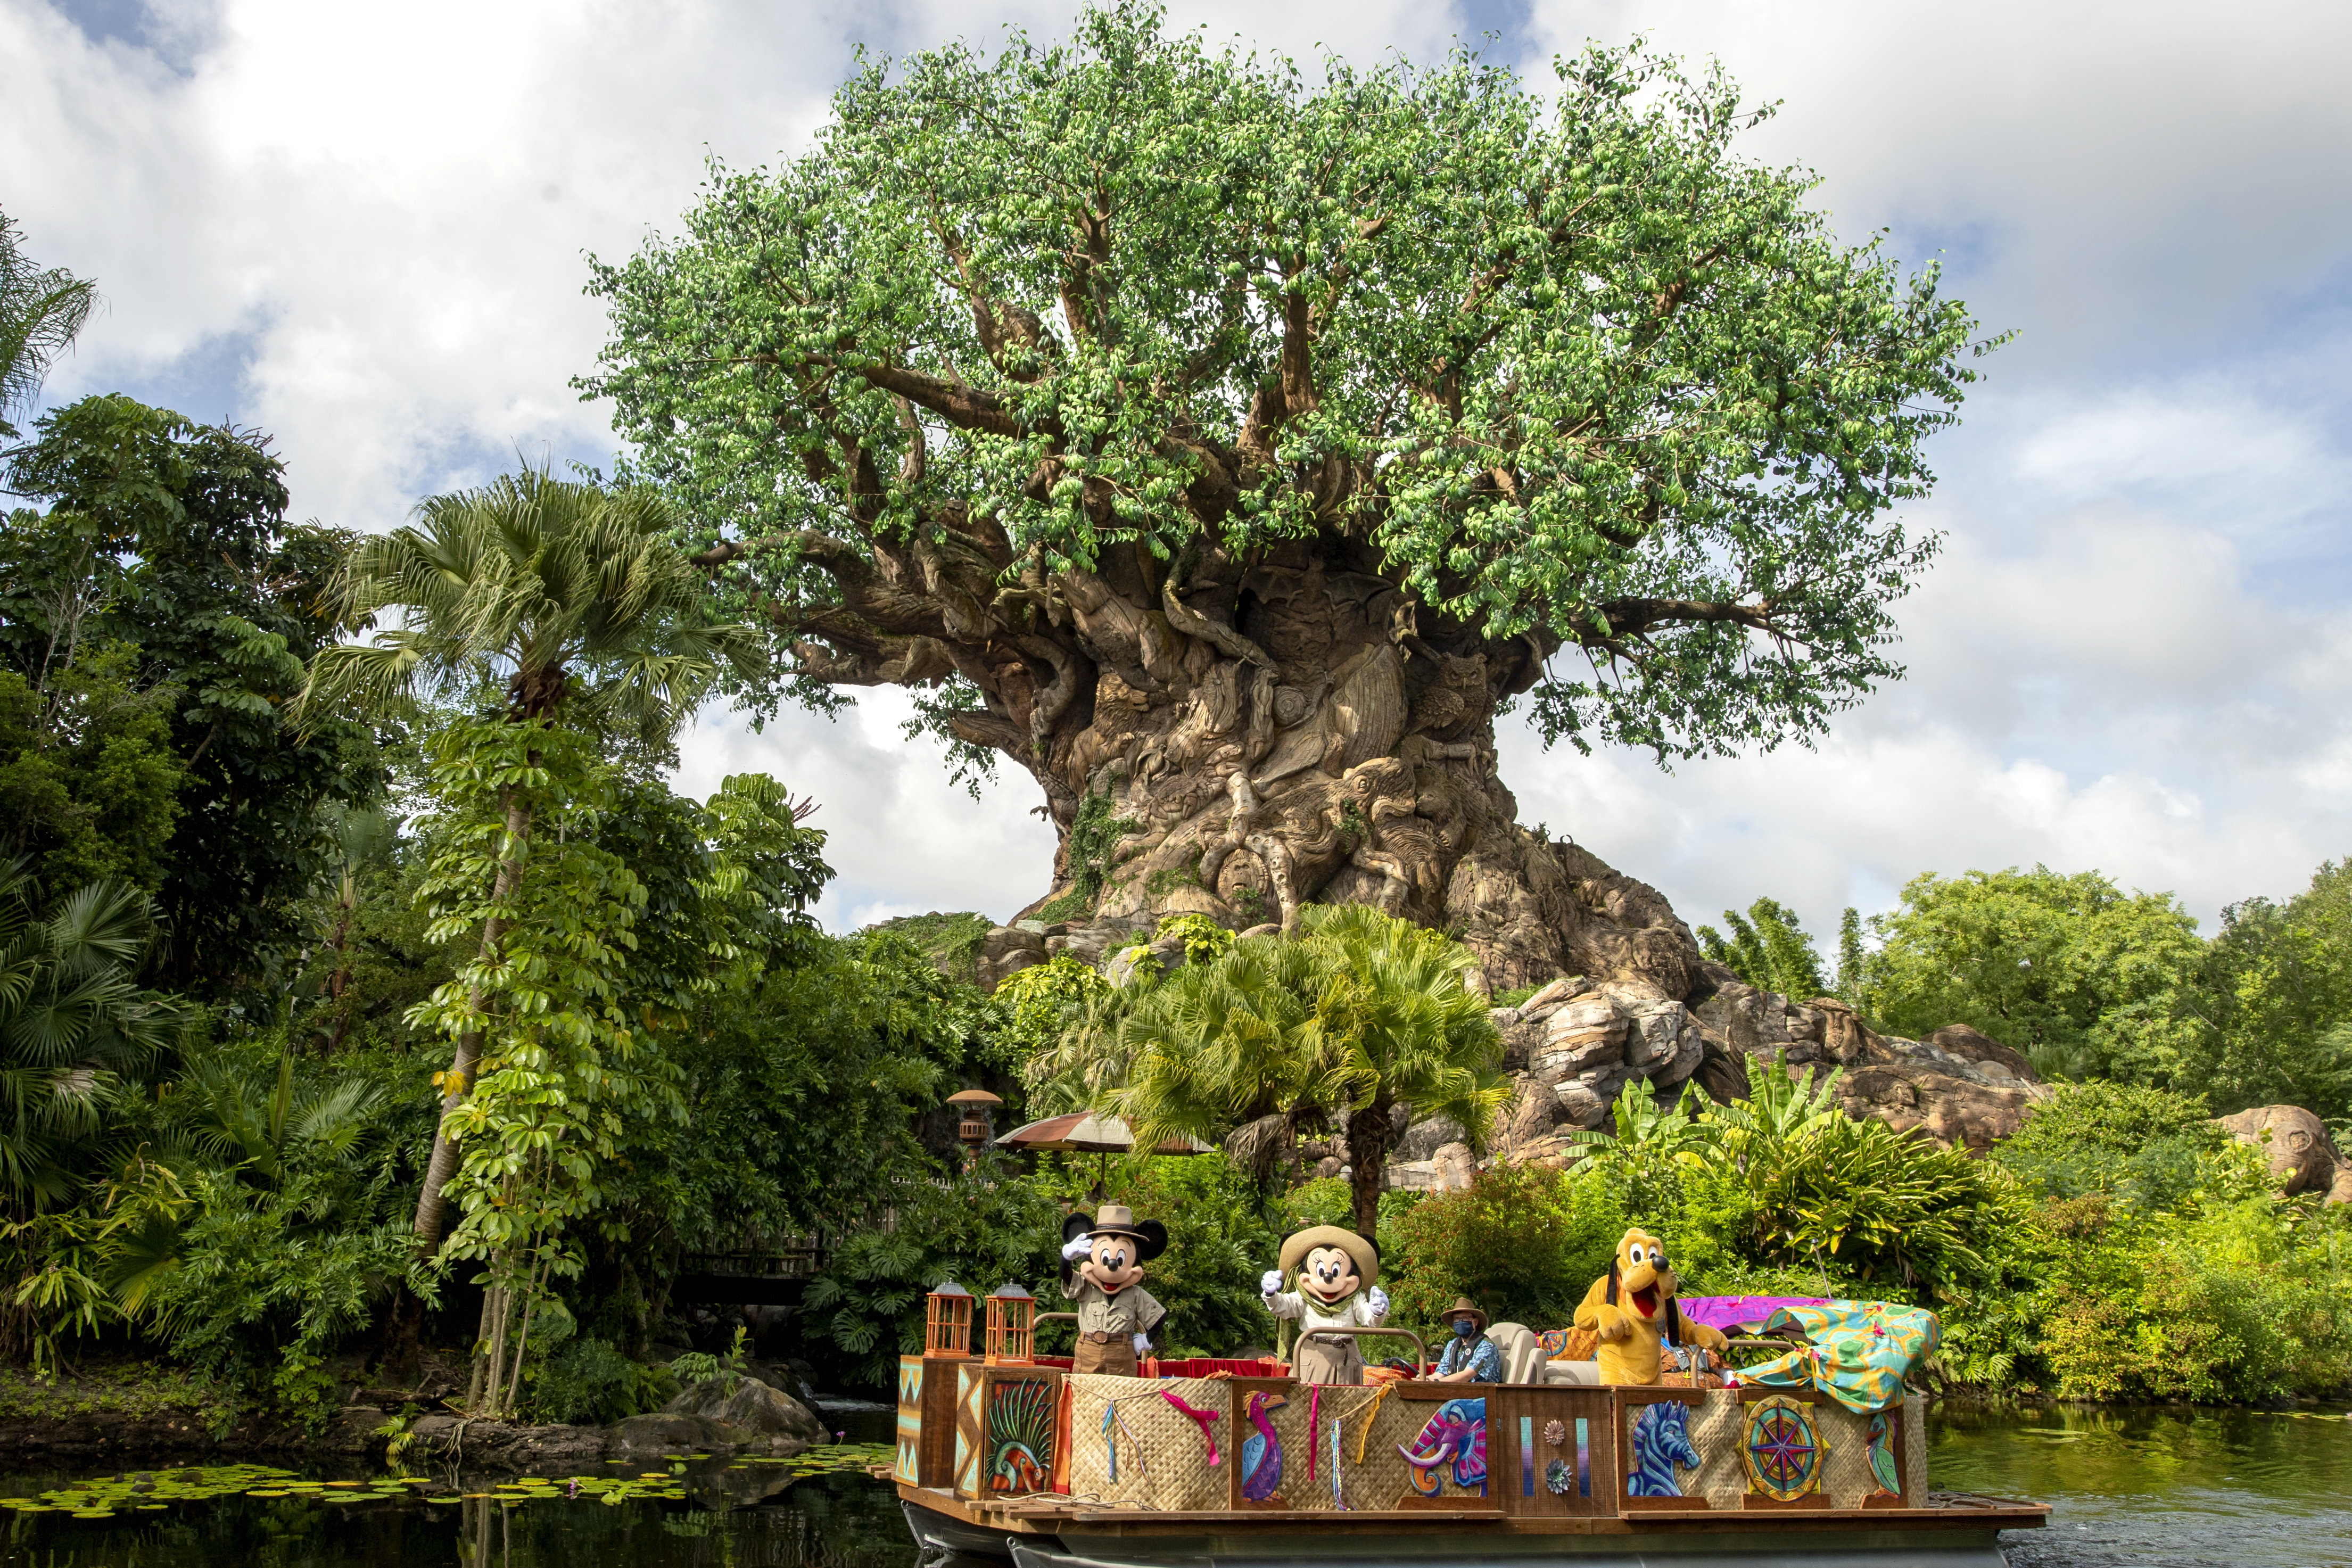 Get ready for a wild time at Disney's Animal Kingdom